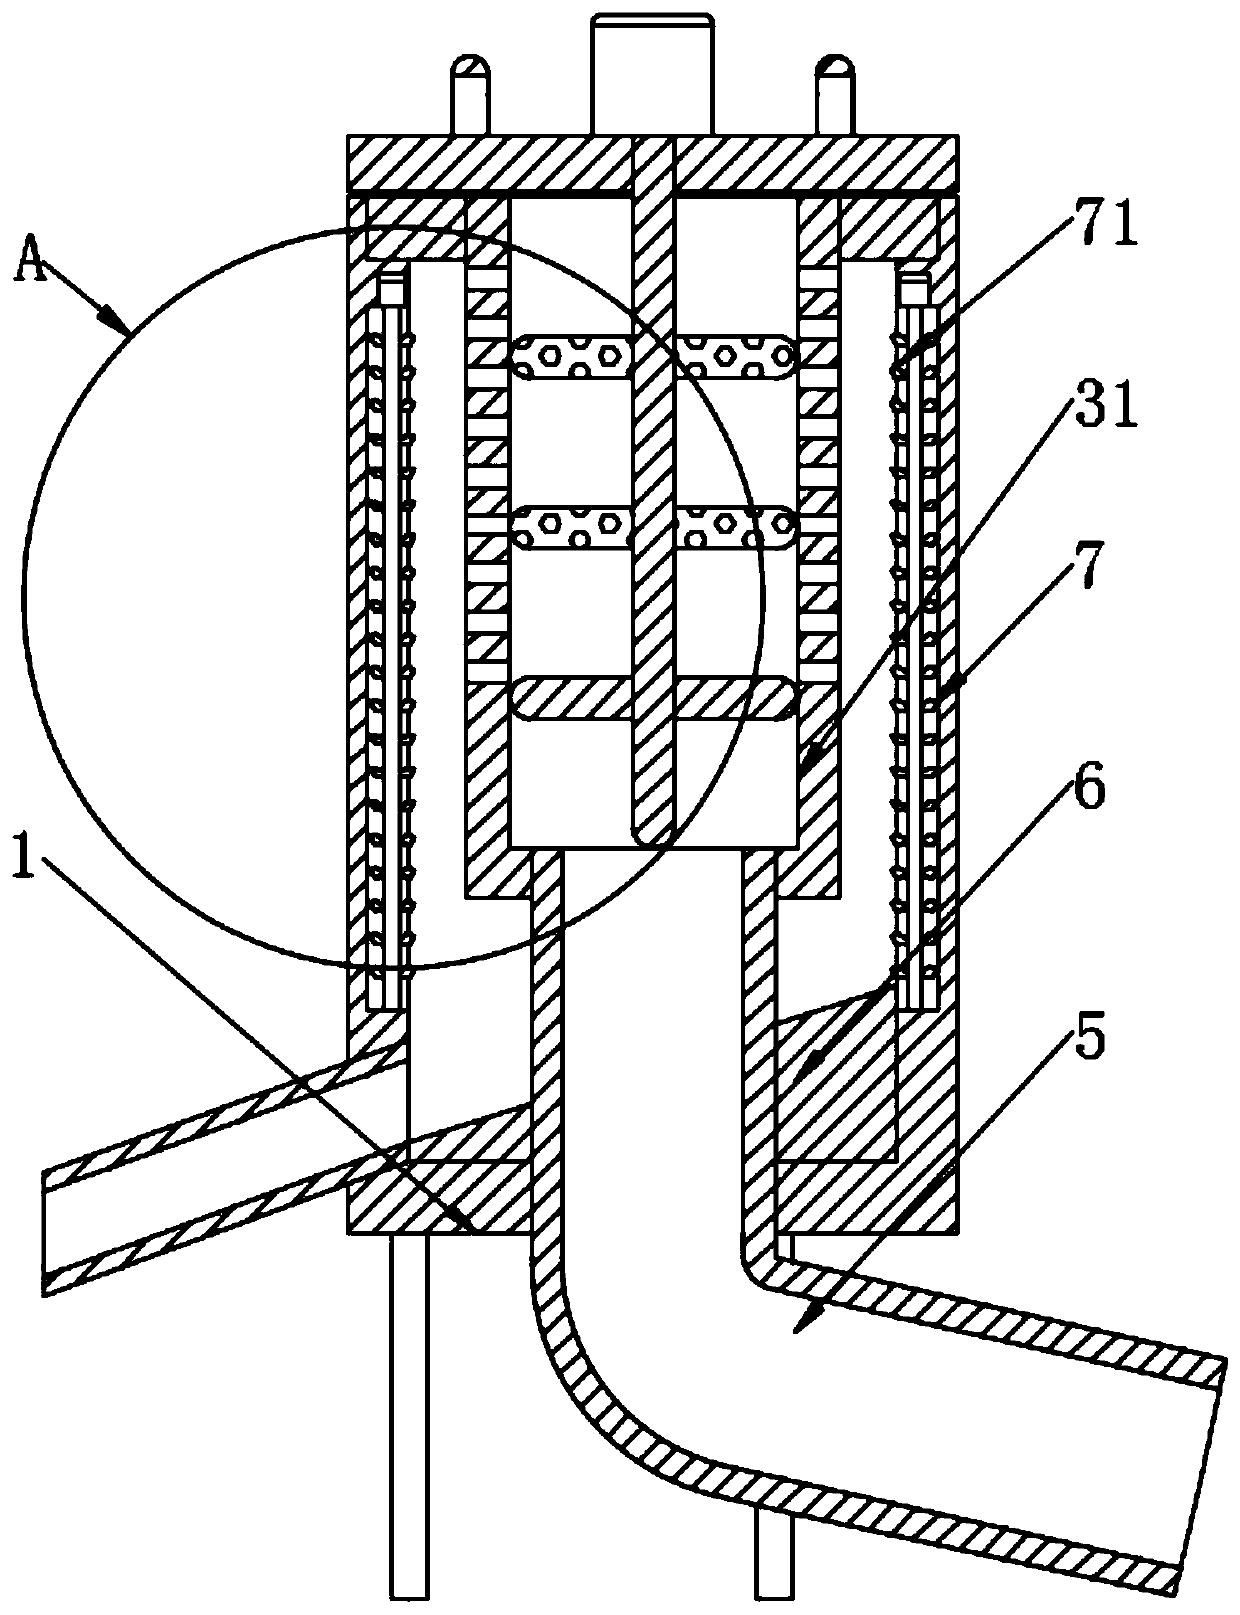 Raw material back flow processing mechanism for casting motor case production